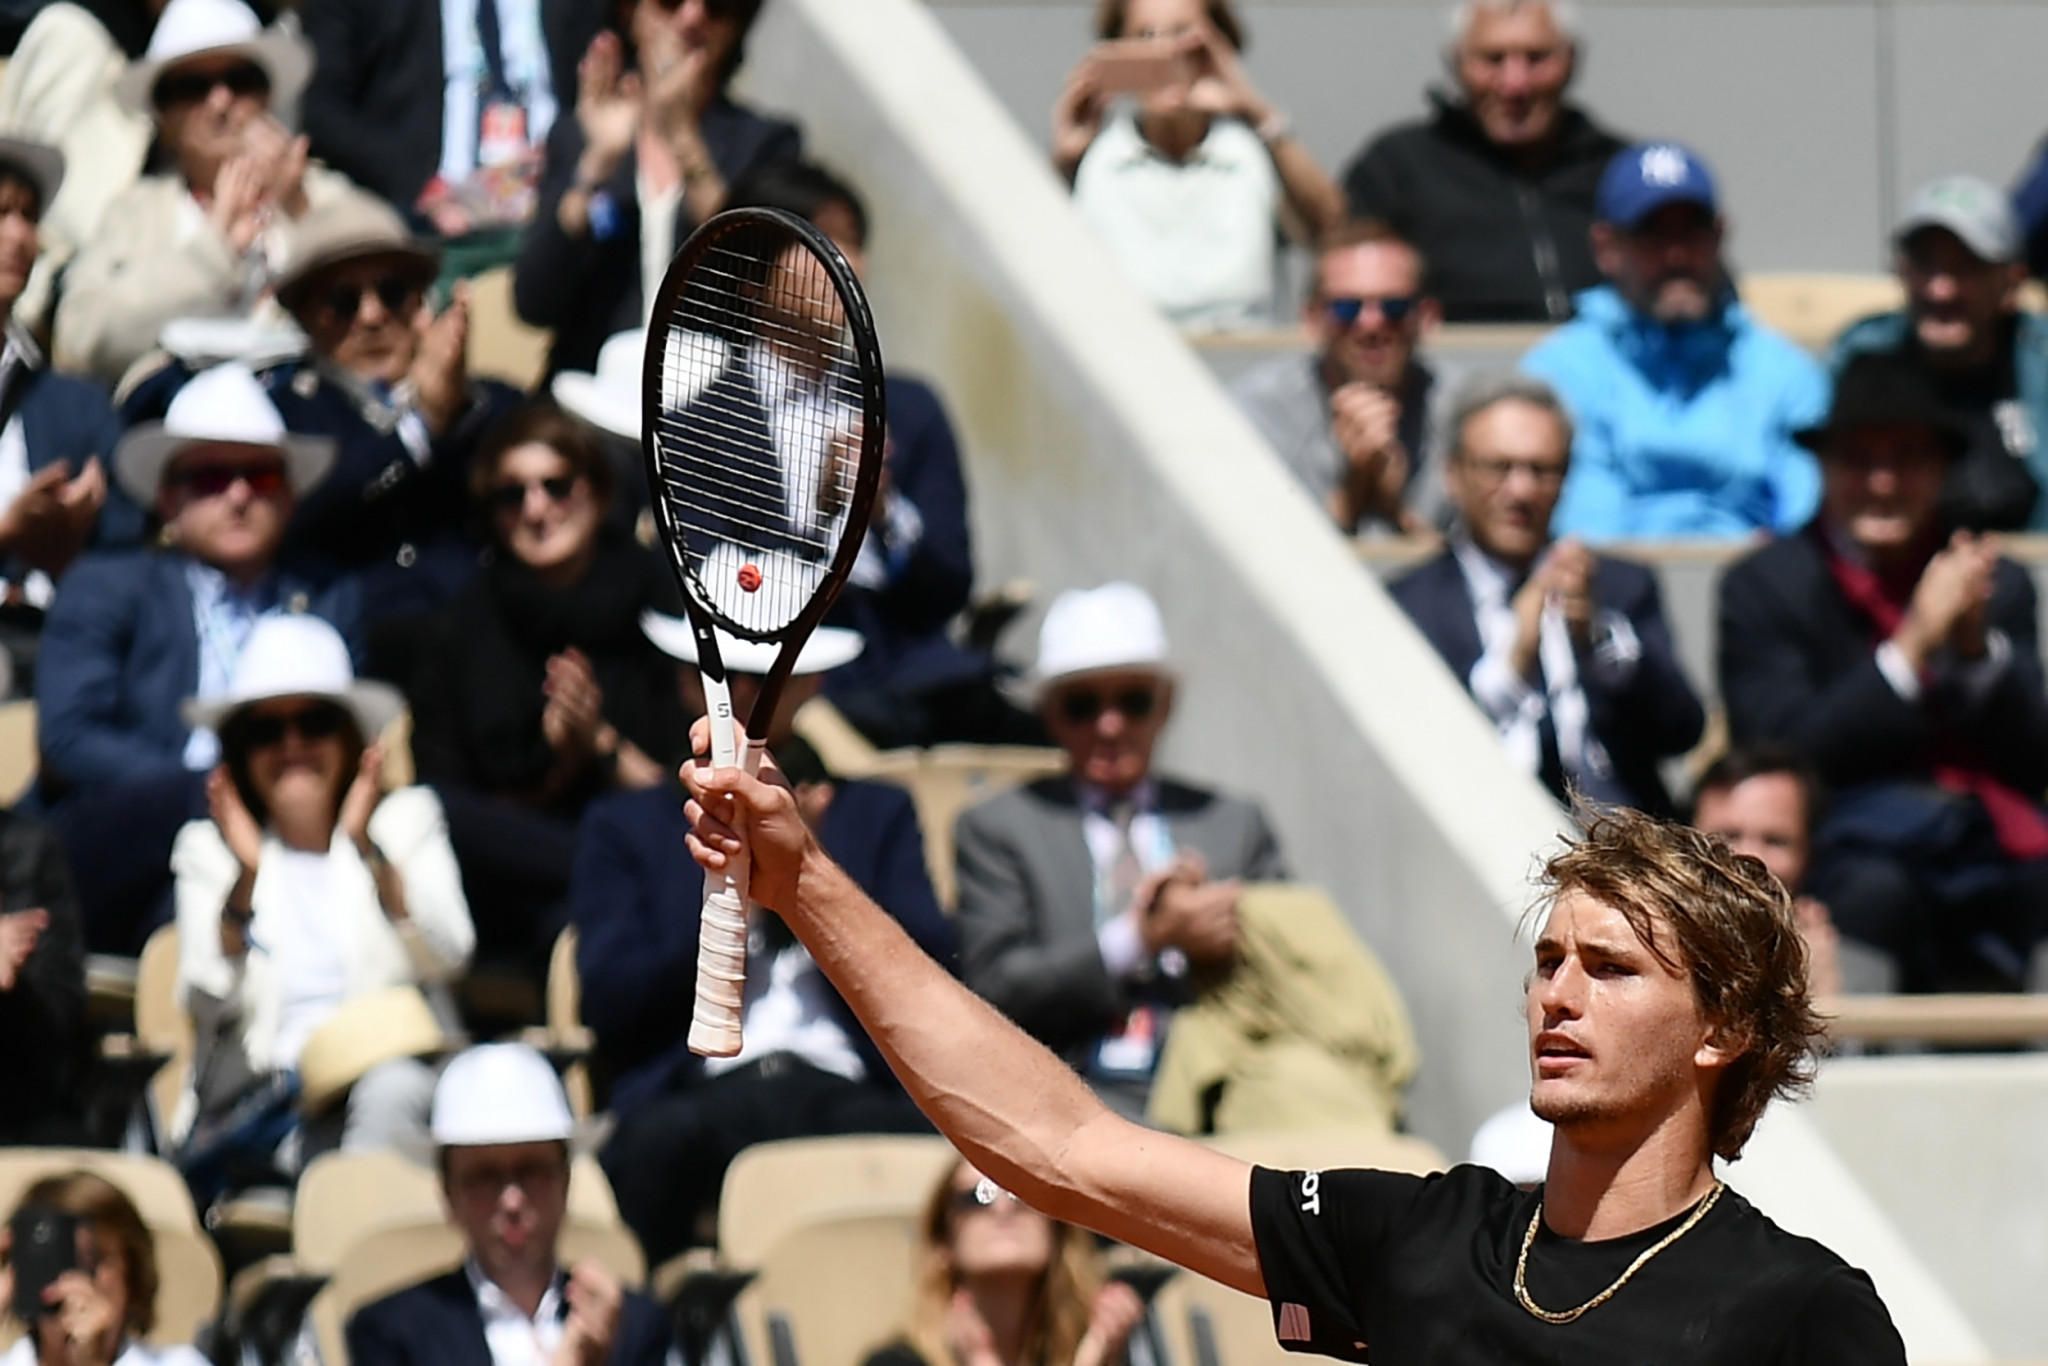 Fifth-seeded German Alexander Zverev came through a frustrating first-round match against world number 56 John Millman of Australia after dropping two sets at the French Open in Paris today ©Getty Images